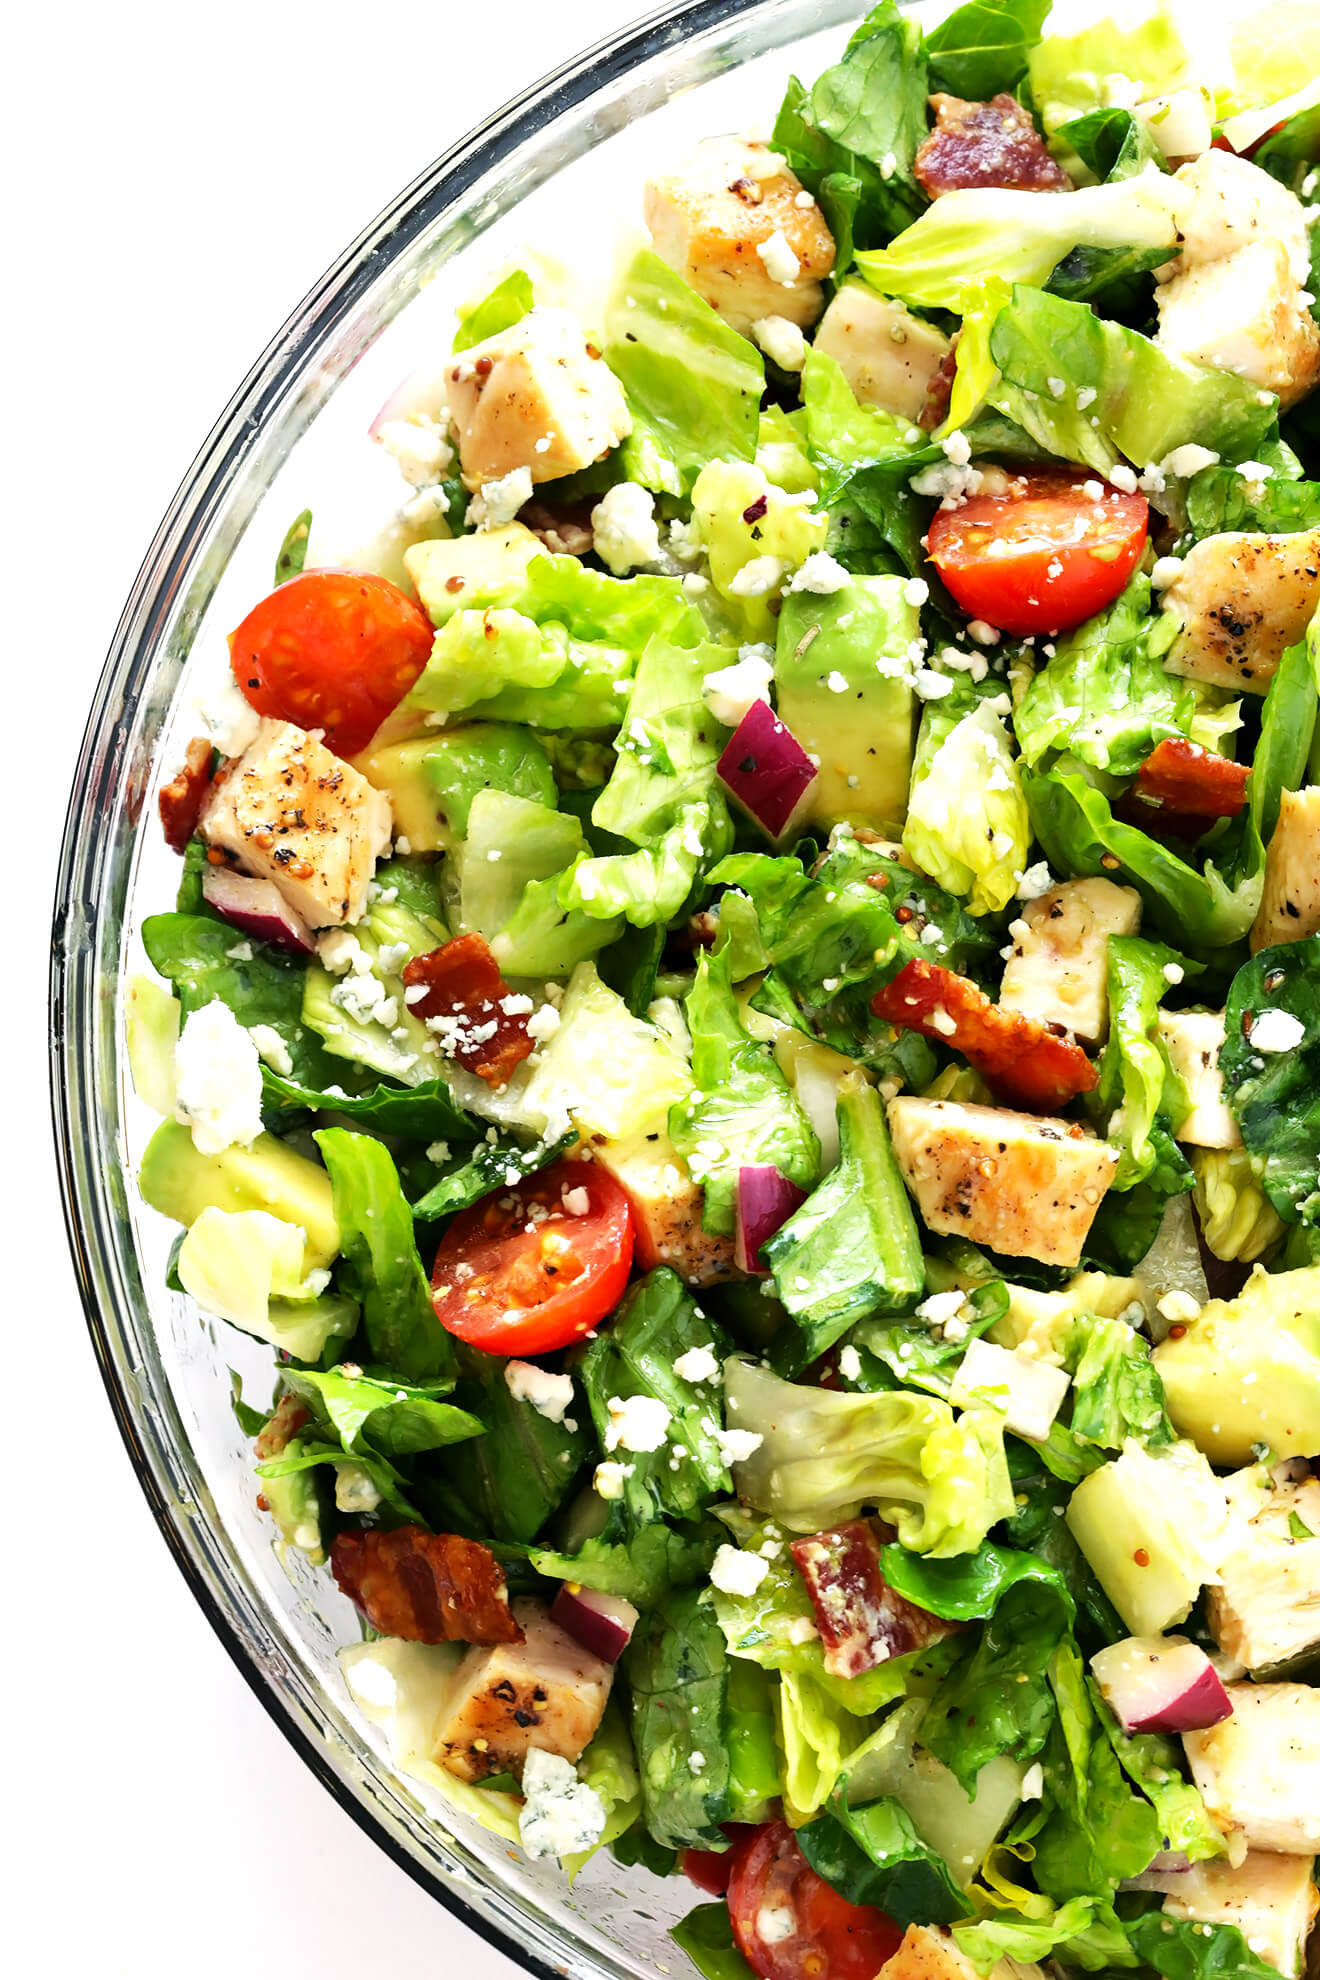 This Chicken, Bacon and Avocado Chopped Salad is tossed with a simple red wine vinaigrette, and tastes so fresh and delicious! | gimmesomeoven.com